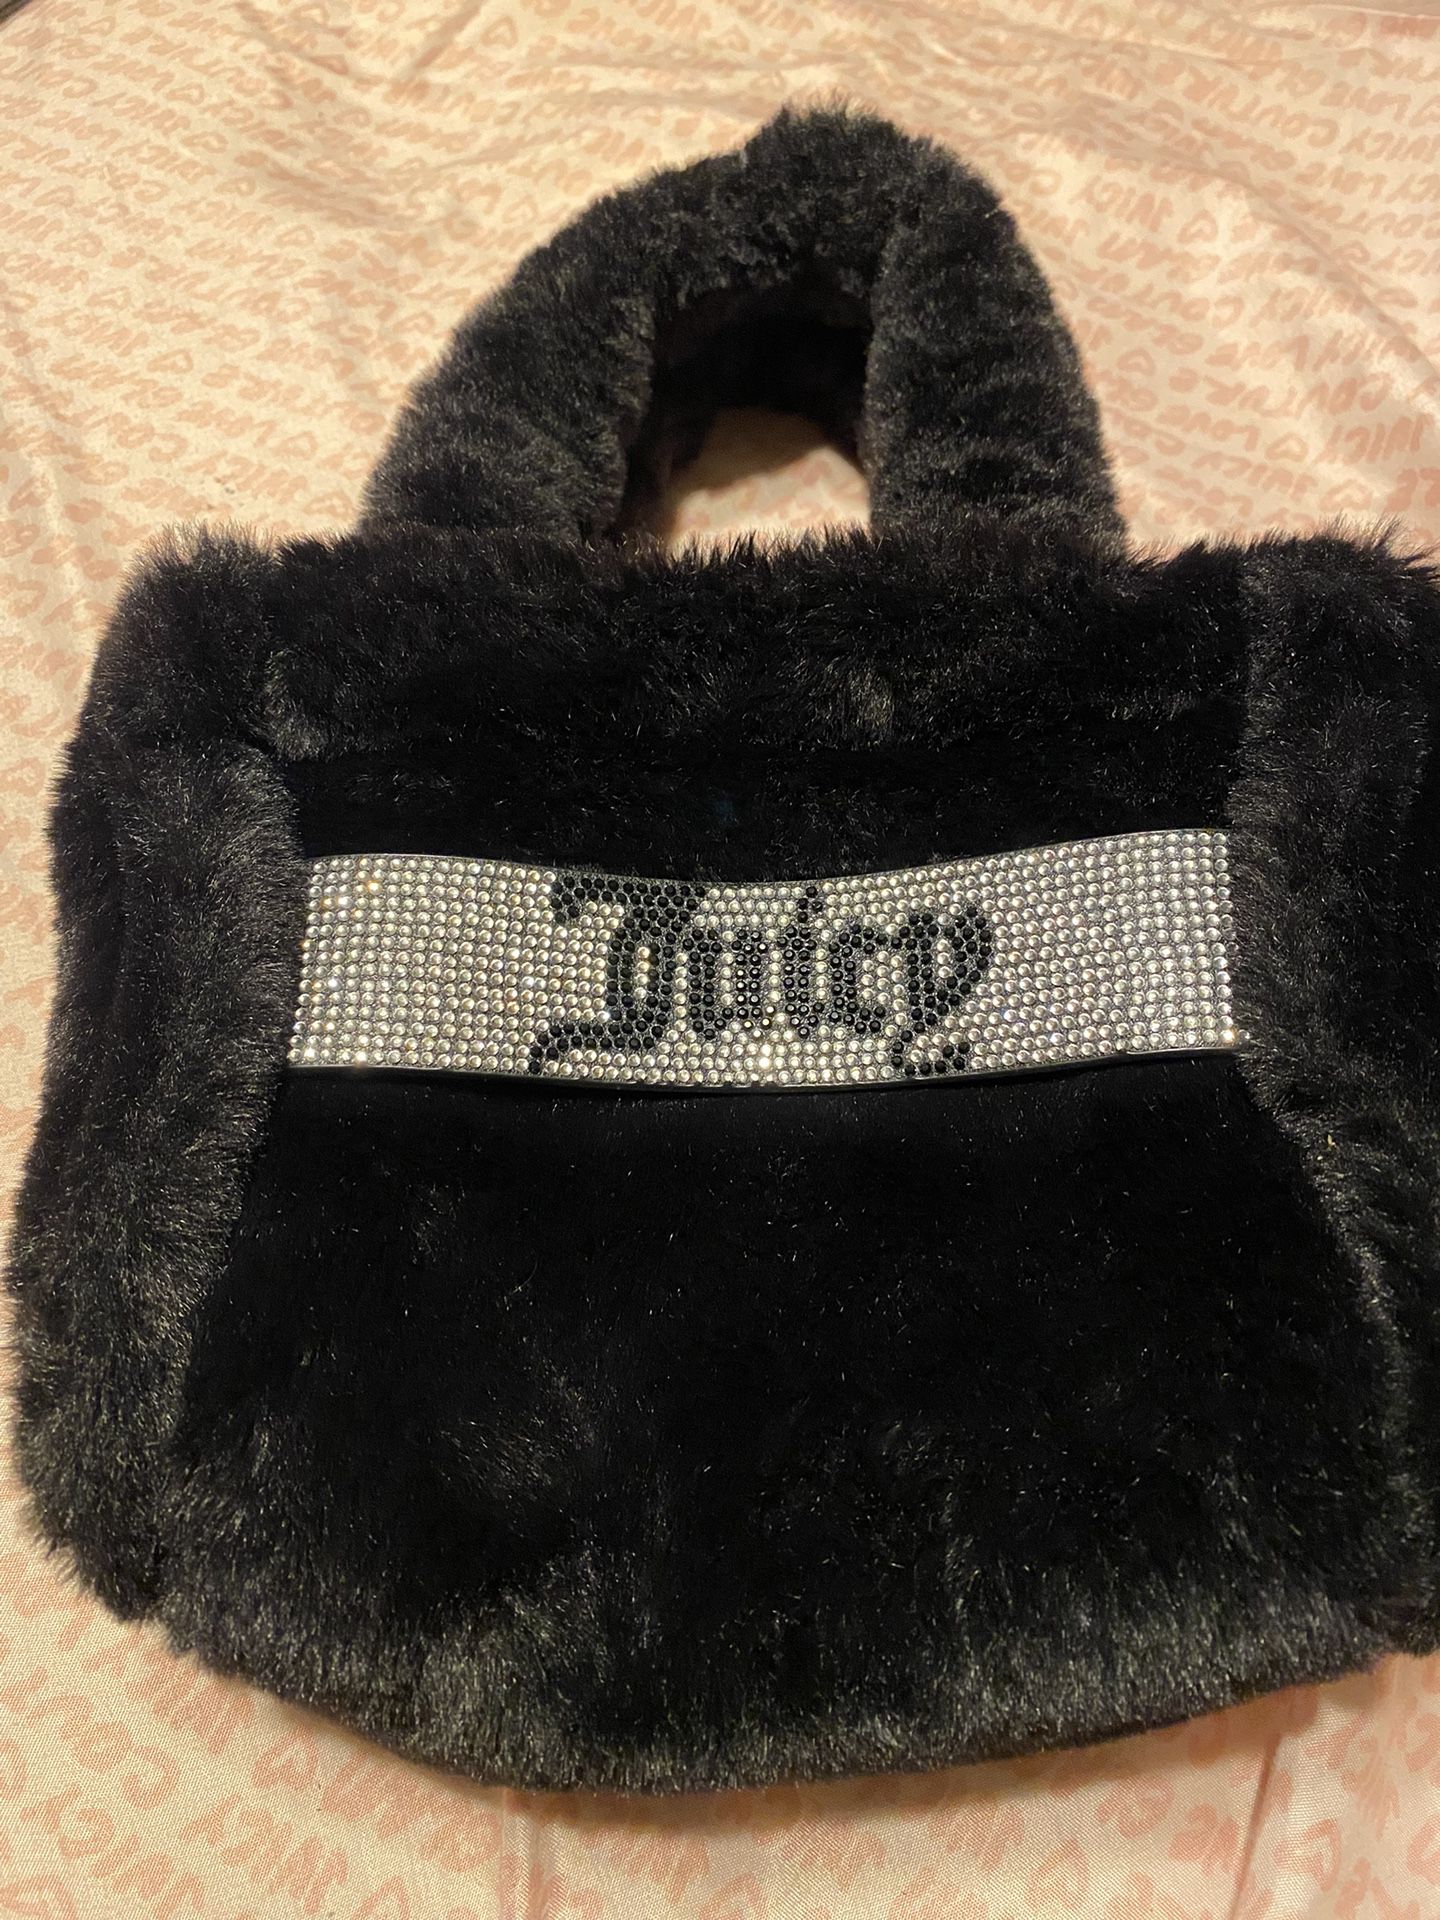 Fuzzy Juicy Couture Bag